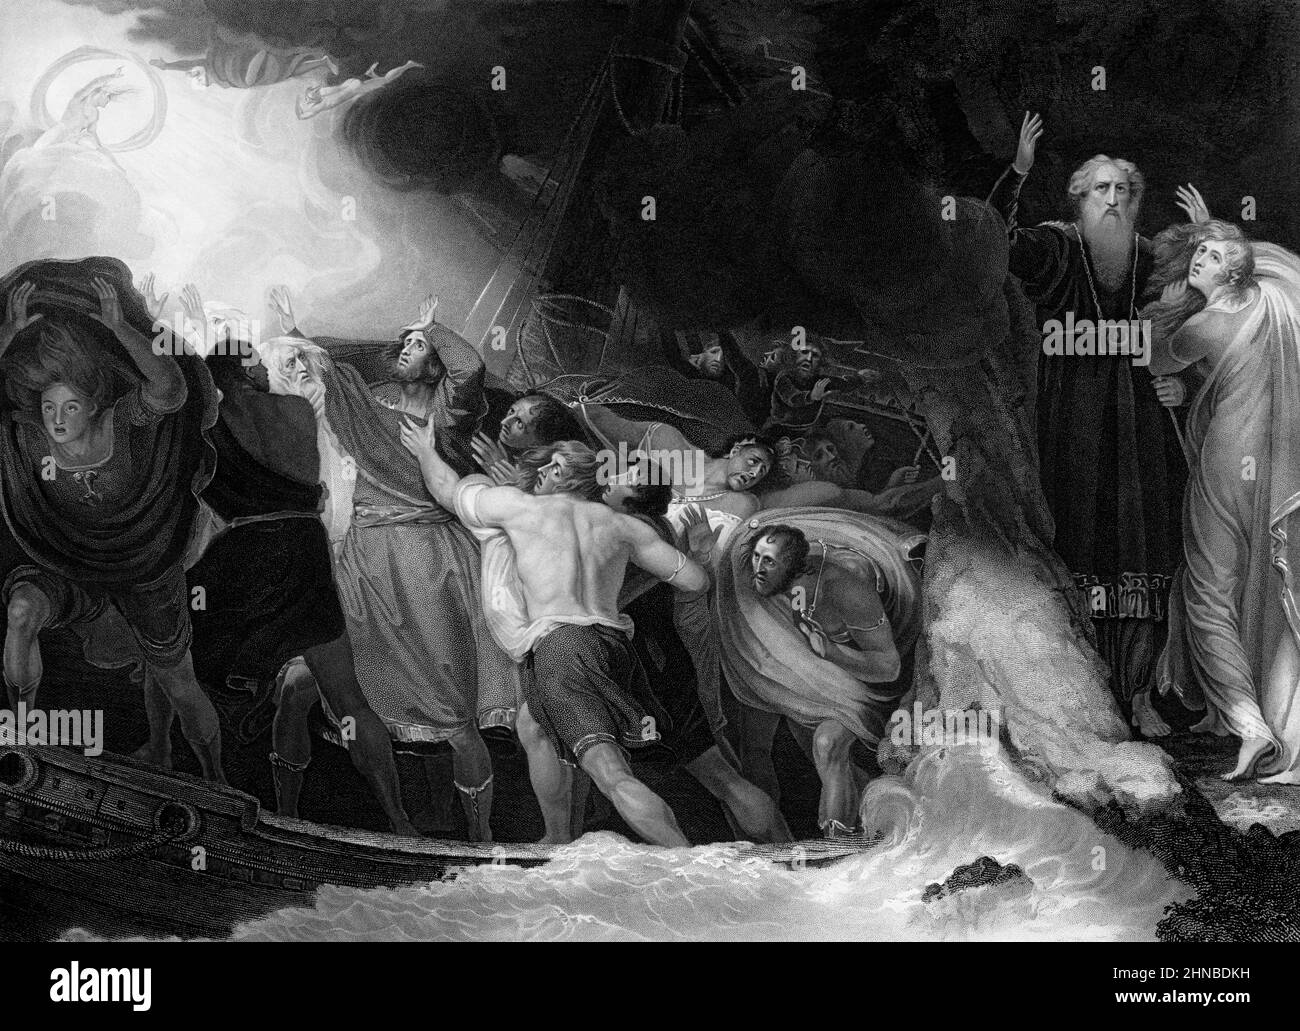 Scene from the tempest Black and White Stock Photos & Images - Alamy